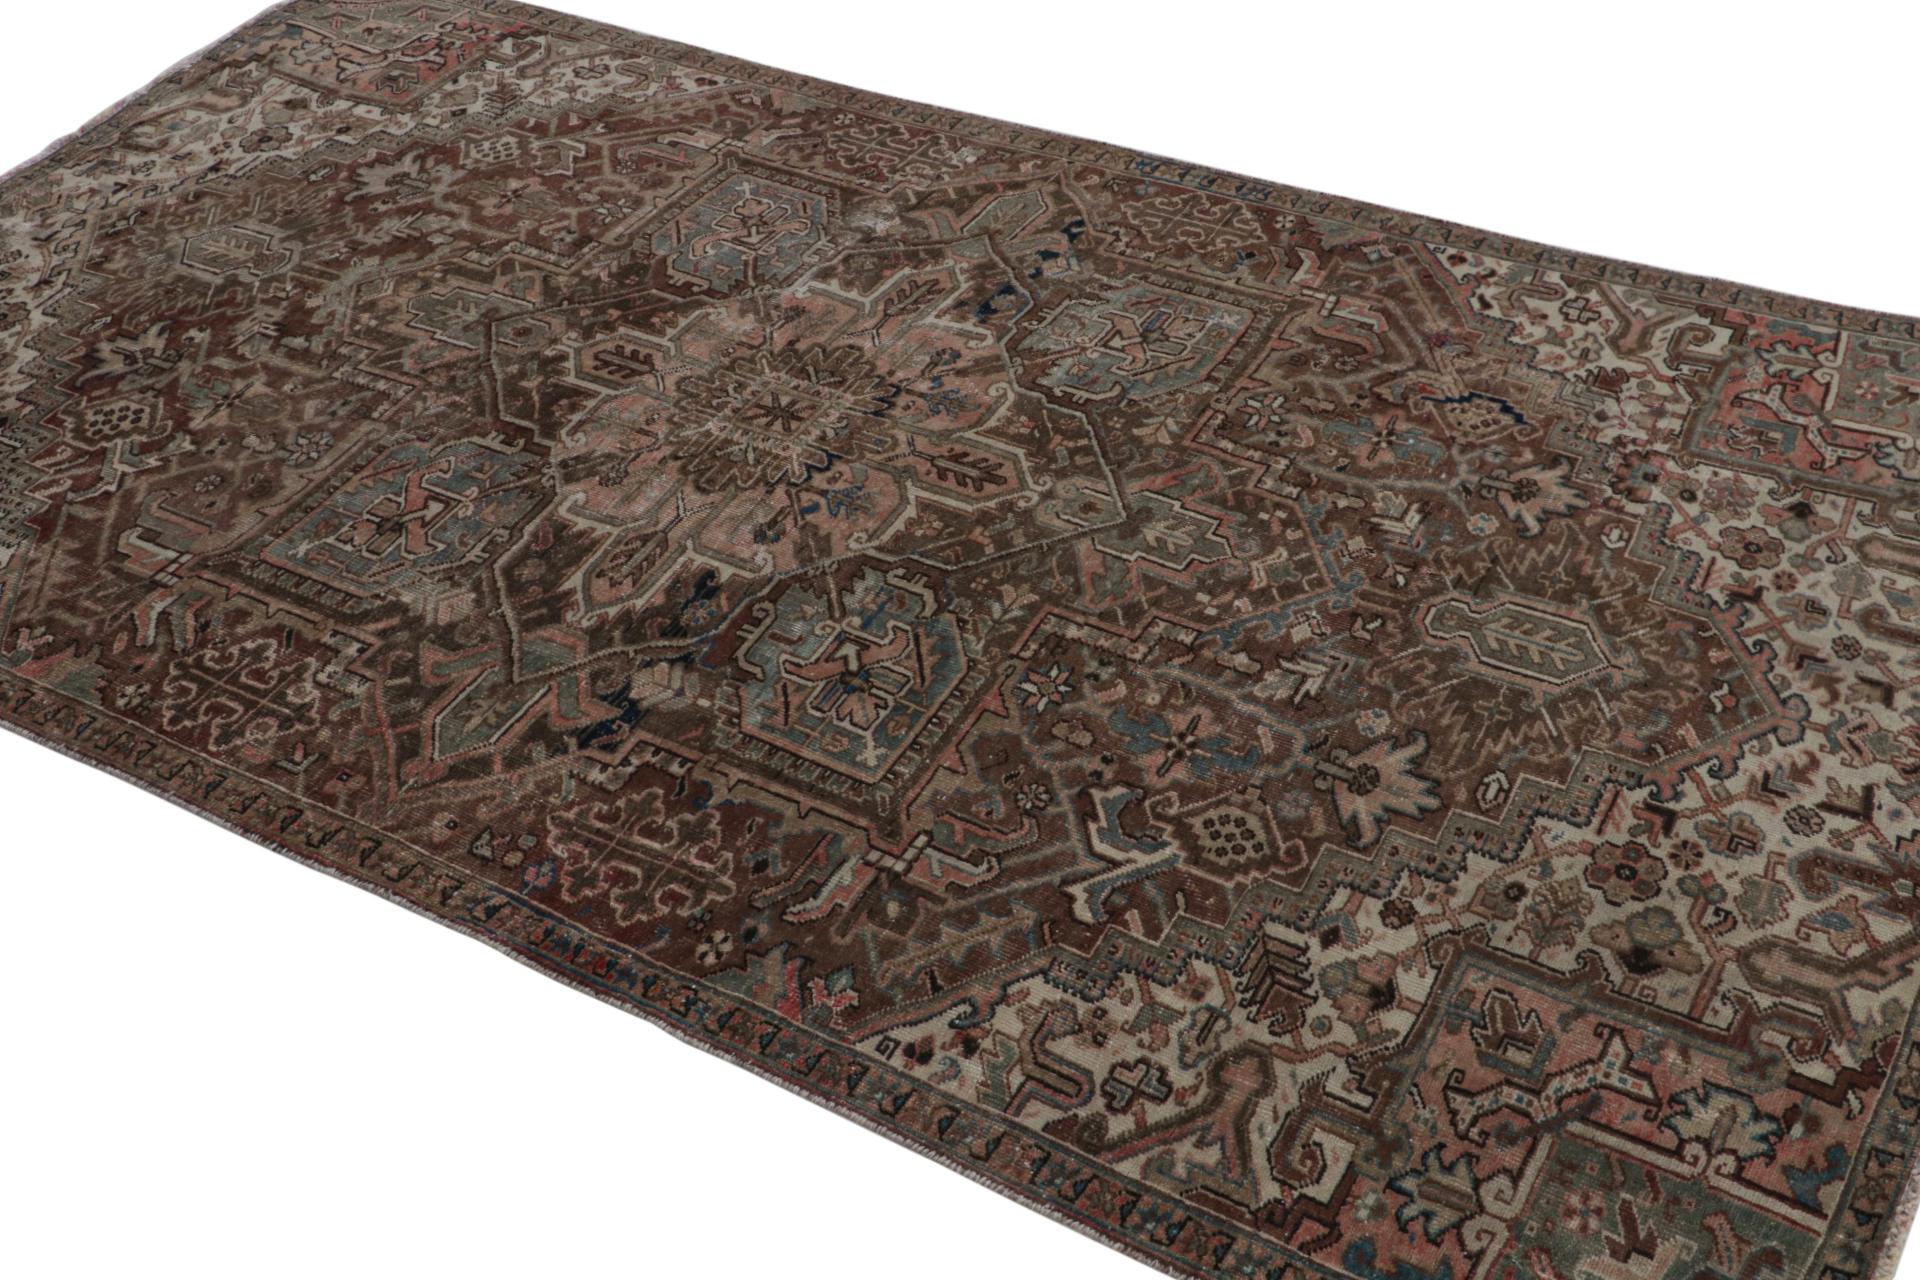 Hand knotted in wool, a young vintage Persian Tabriz rug originating circa 1970-1980 - making its way to our reputed Antique & Vintage collection.

On the Design:

Keen eyes will note that the wash on this piece is very subtle making the rug very